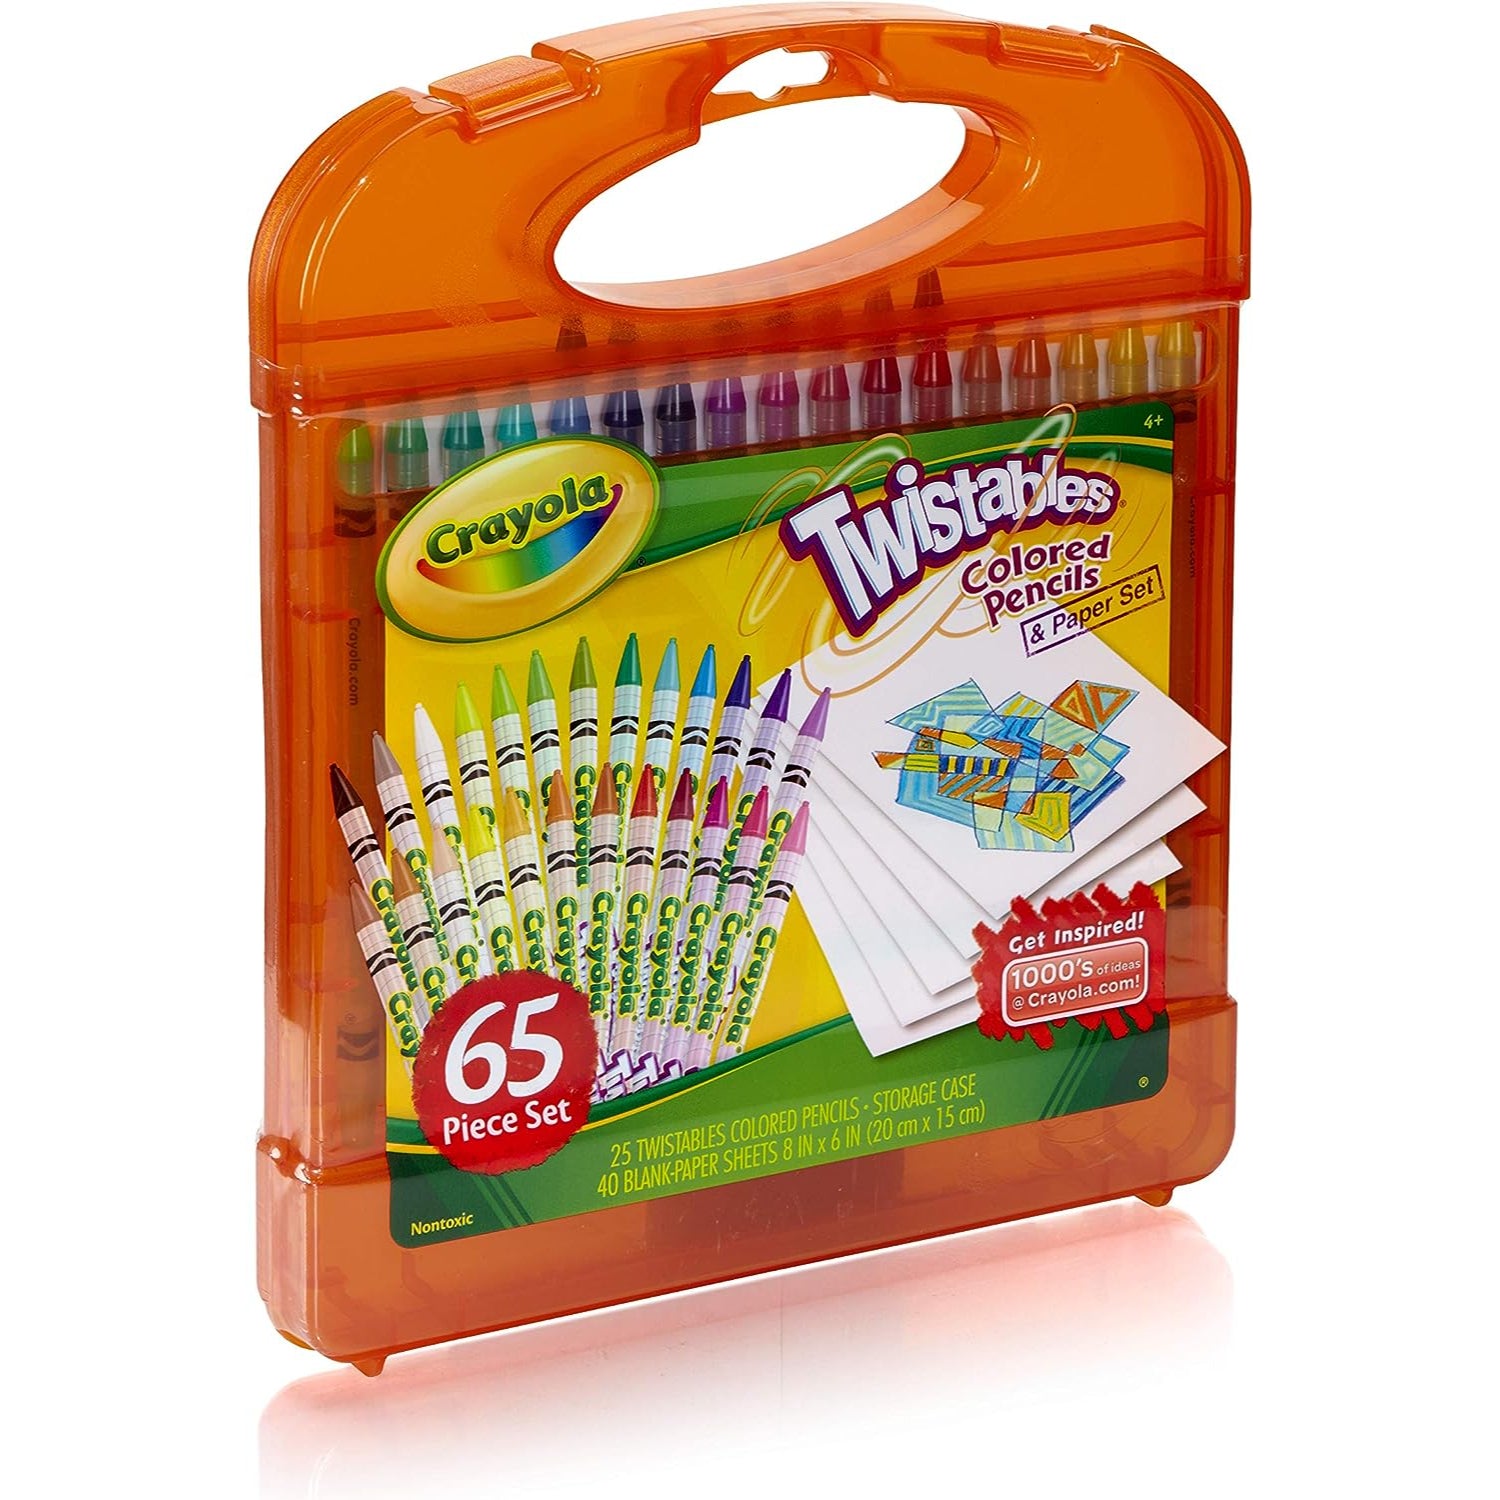  Crayola Twistables Colored Pencils, Gift for Kids